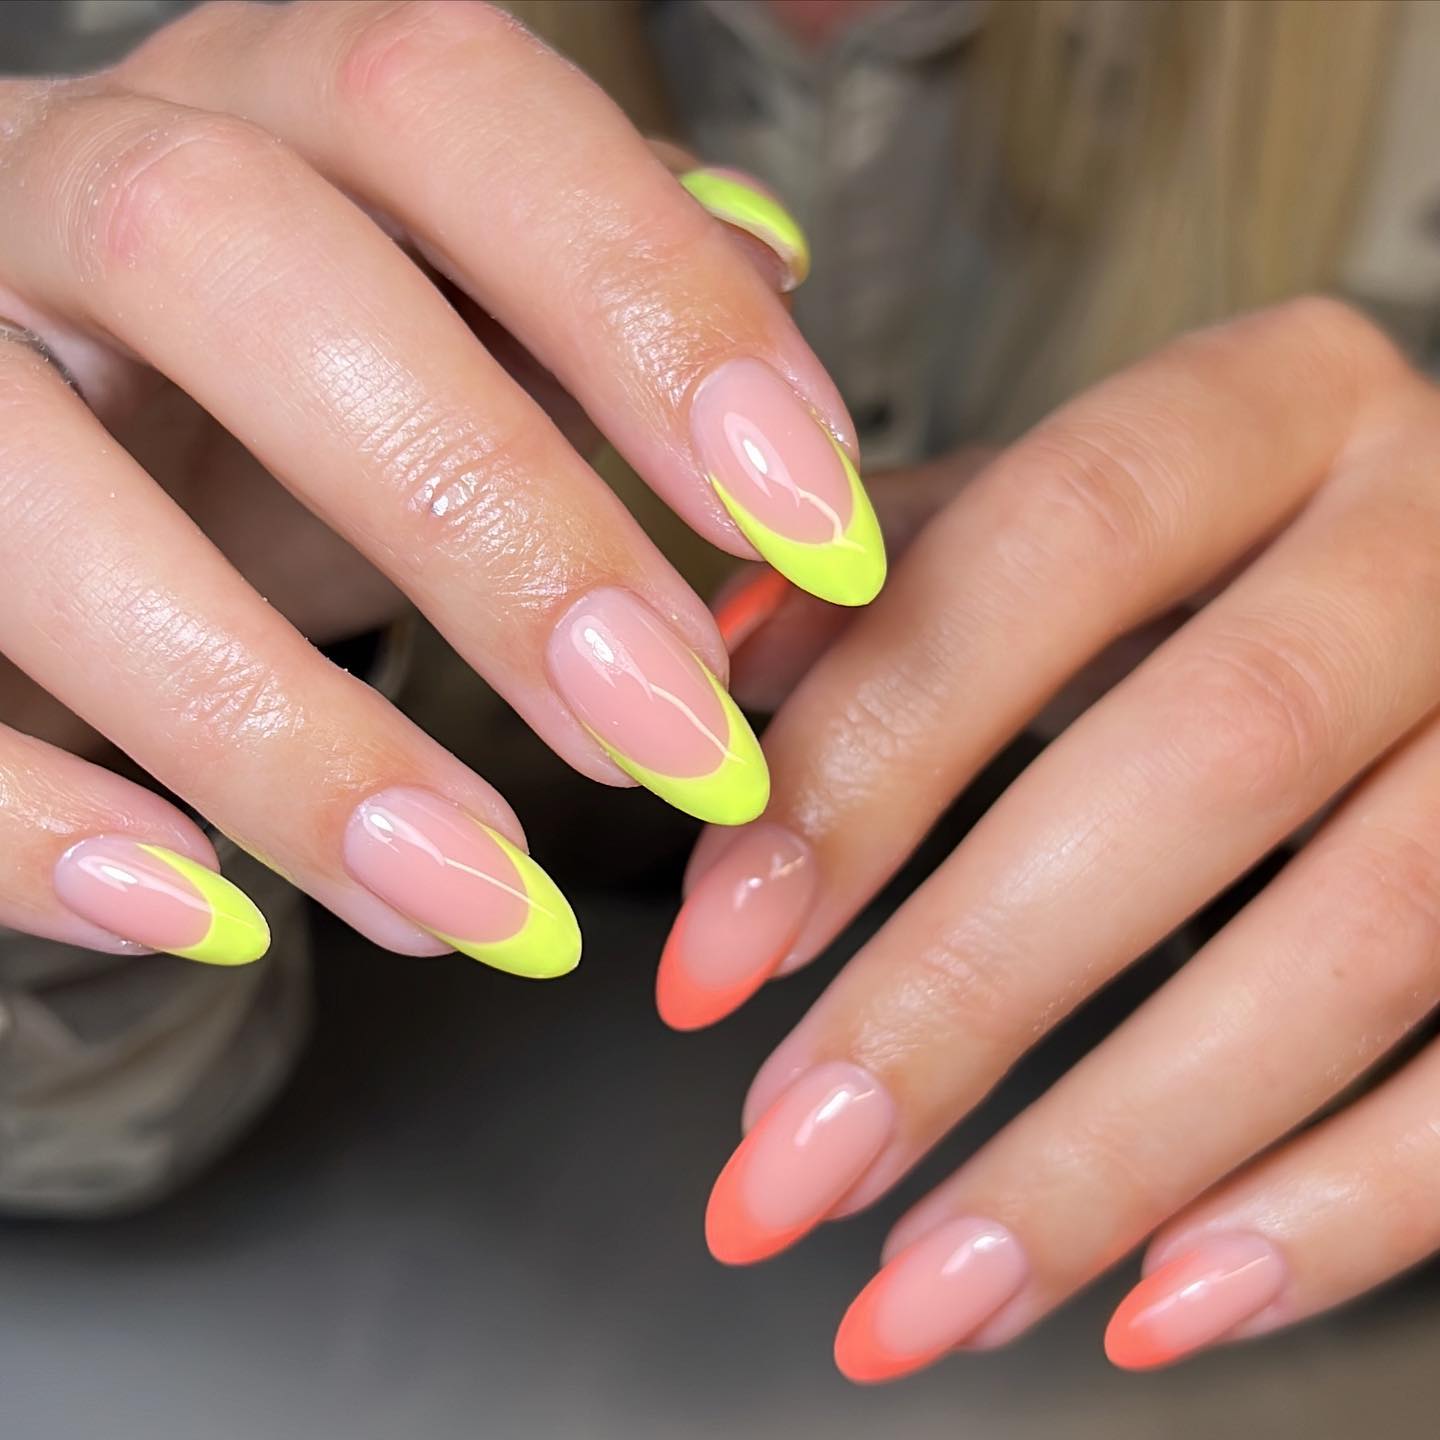 34 Neon Nail Art Designs We'Re Obsessed With - Beauty Bay Edited